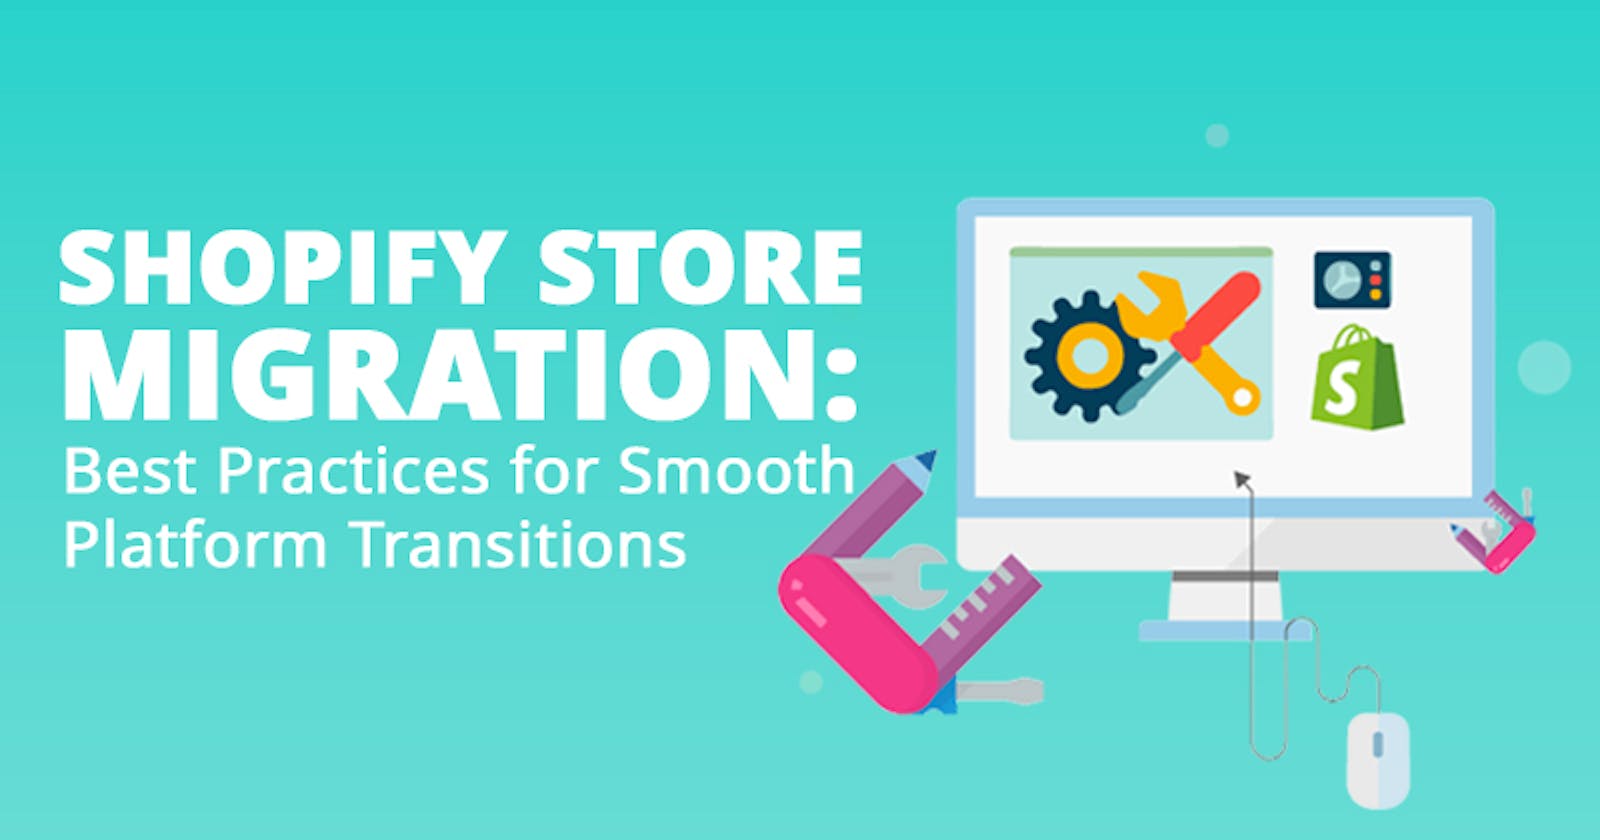 Shopify Store Migration: Best Practices for Smooth Platform Transitions